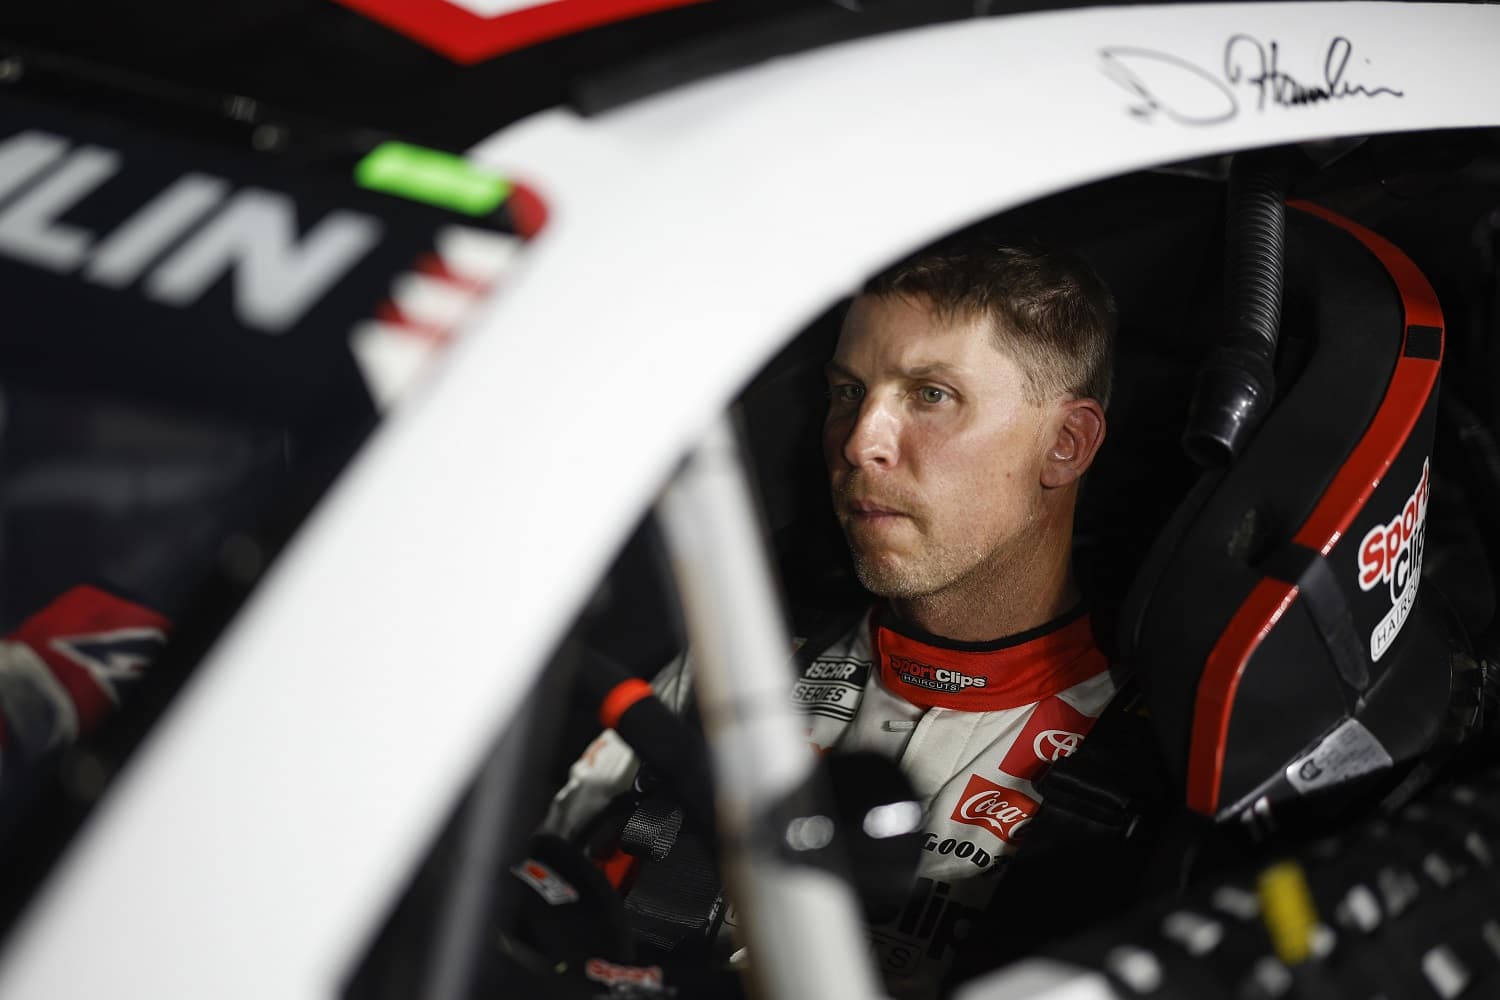 Denny Hamlin sits in his car during qualifying for the NASCAR Clash at the Coliseum at Los Angeles Coliseum on Feb. 4, 2023. | Chris Graythen/Getty Images